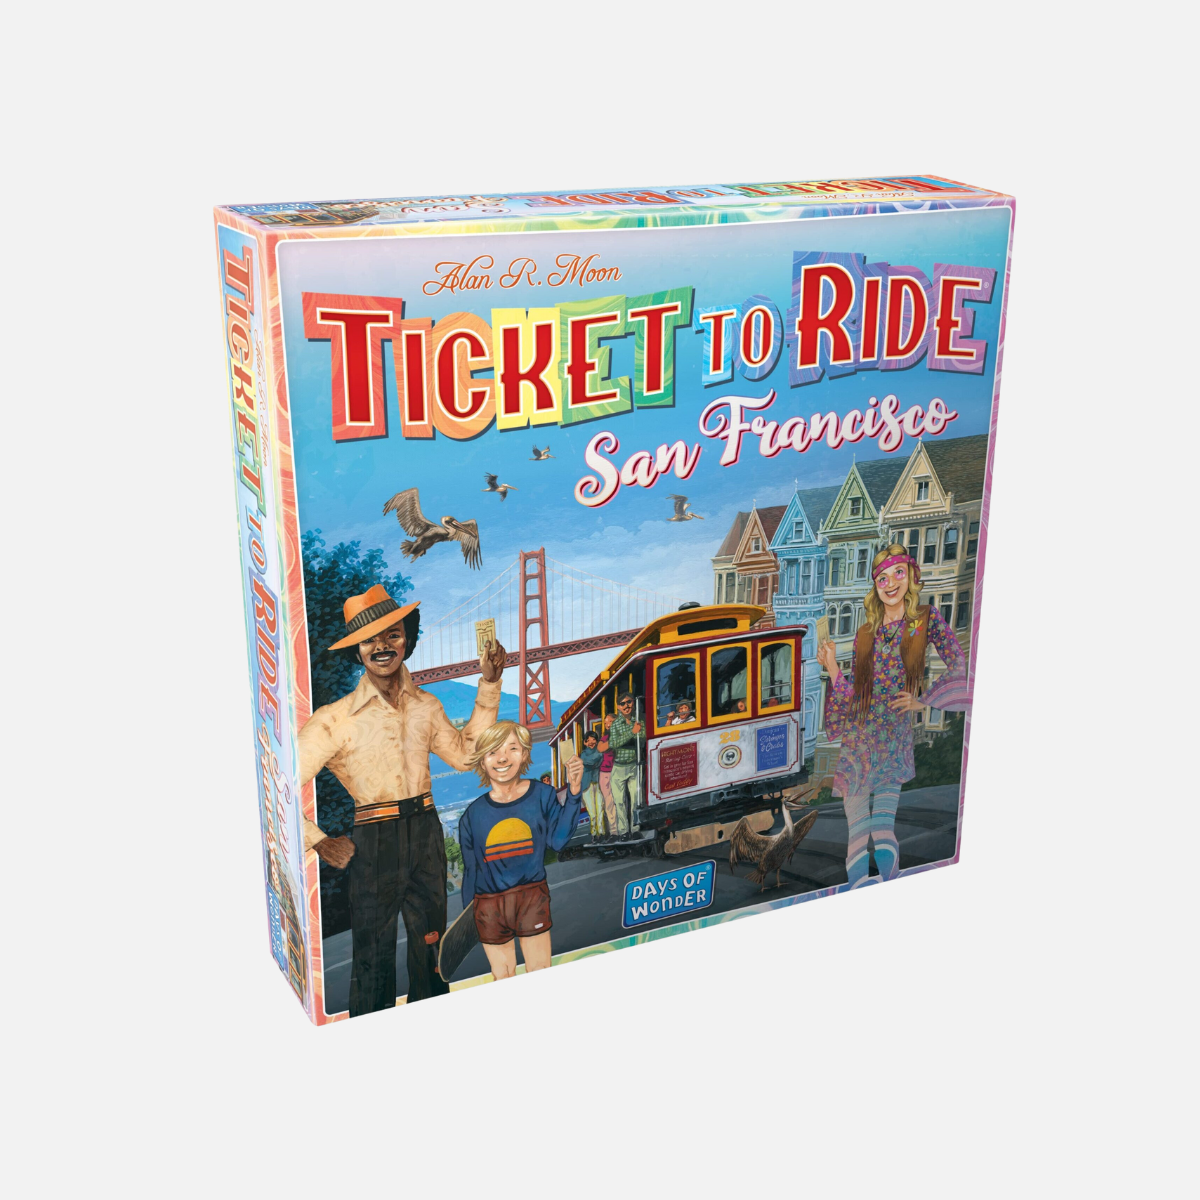 Ticket to Ride San Francisco board game